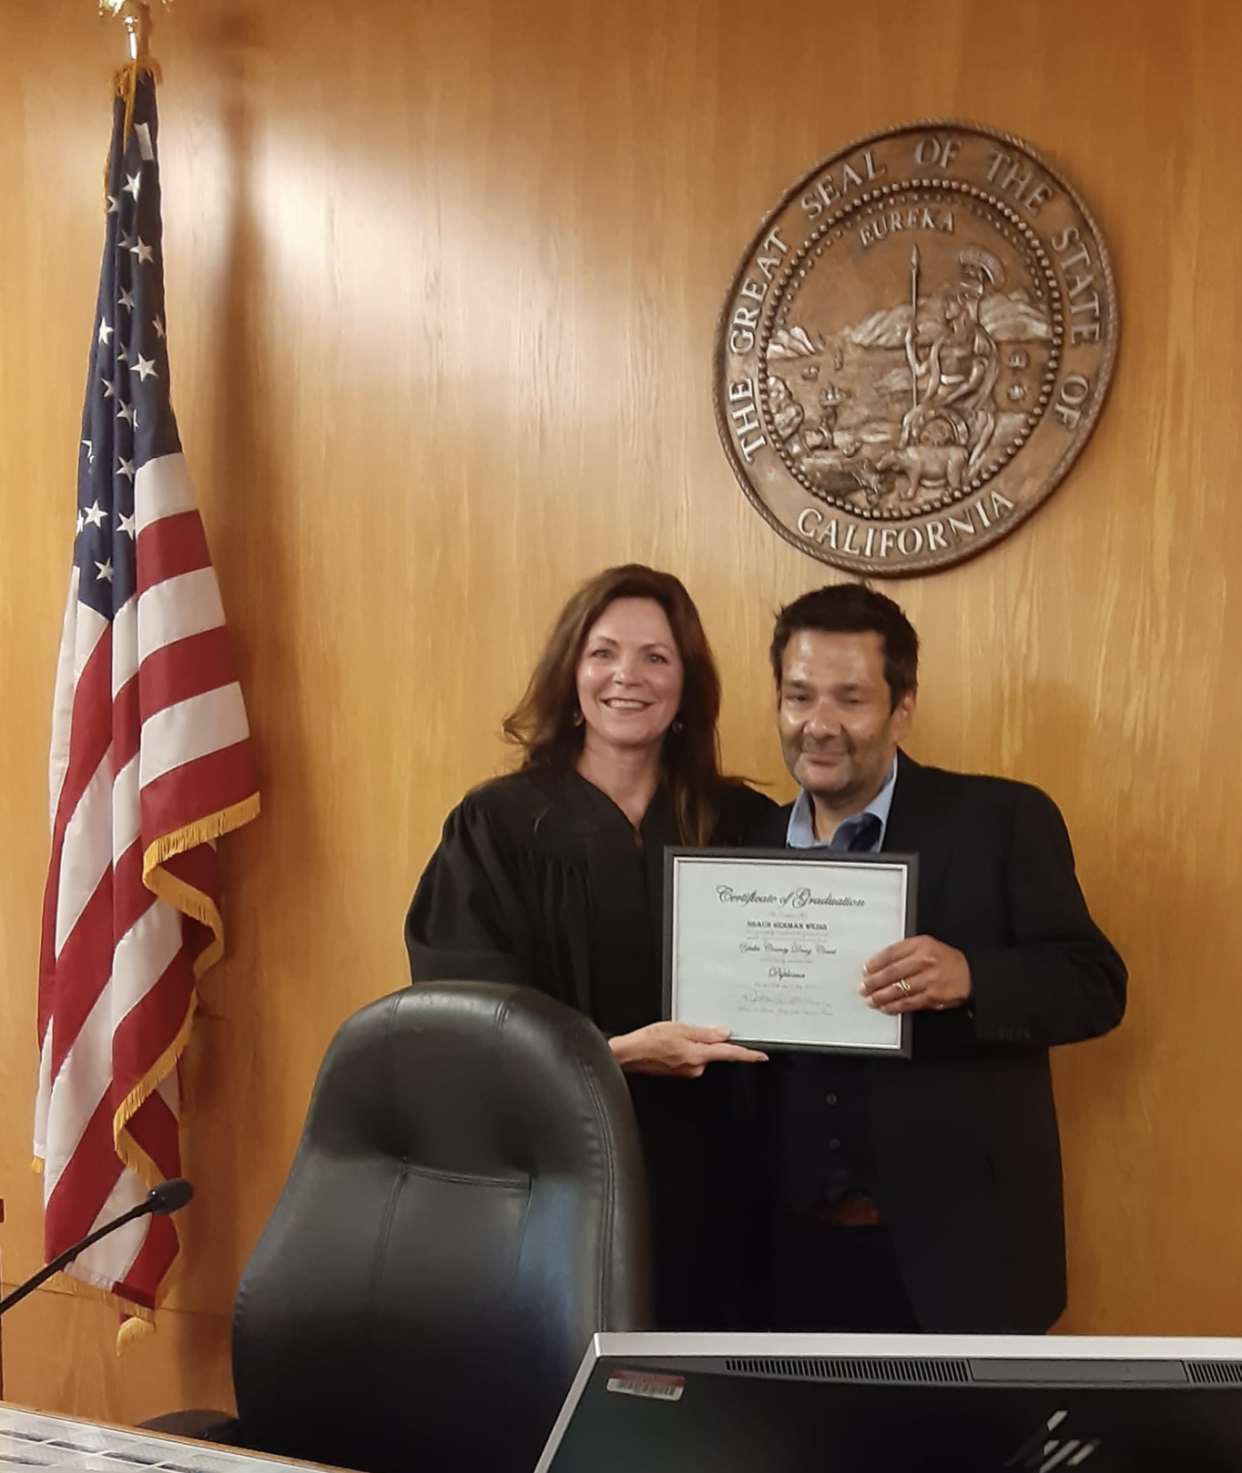 Shaun Weiss has graduated from drug court. (Facebook)